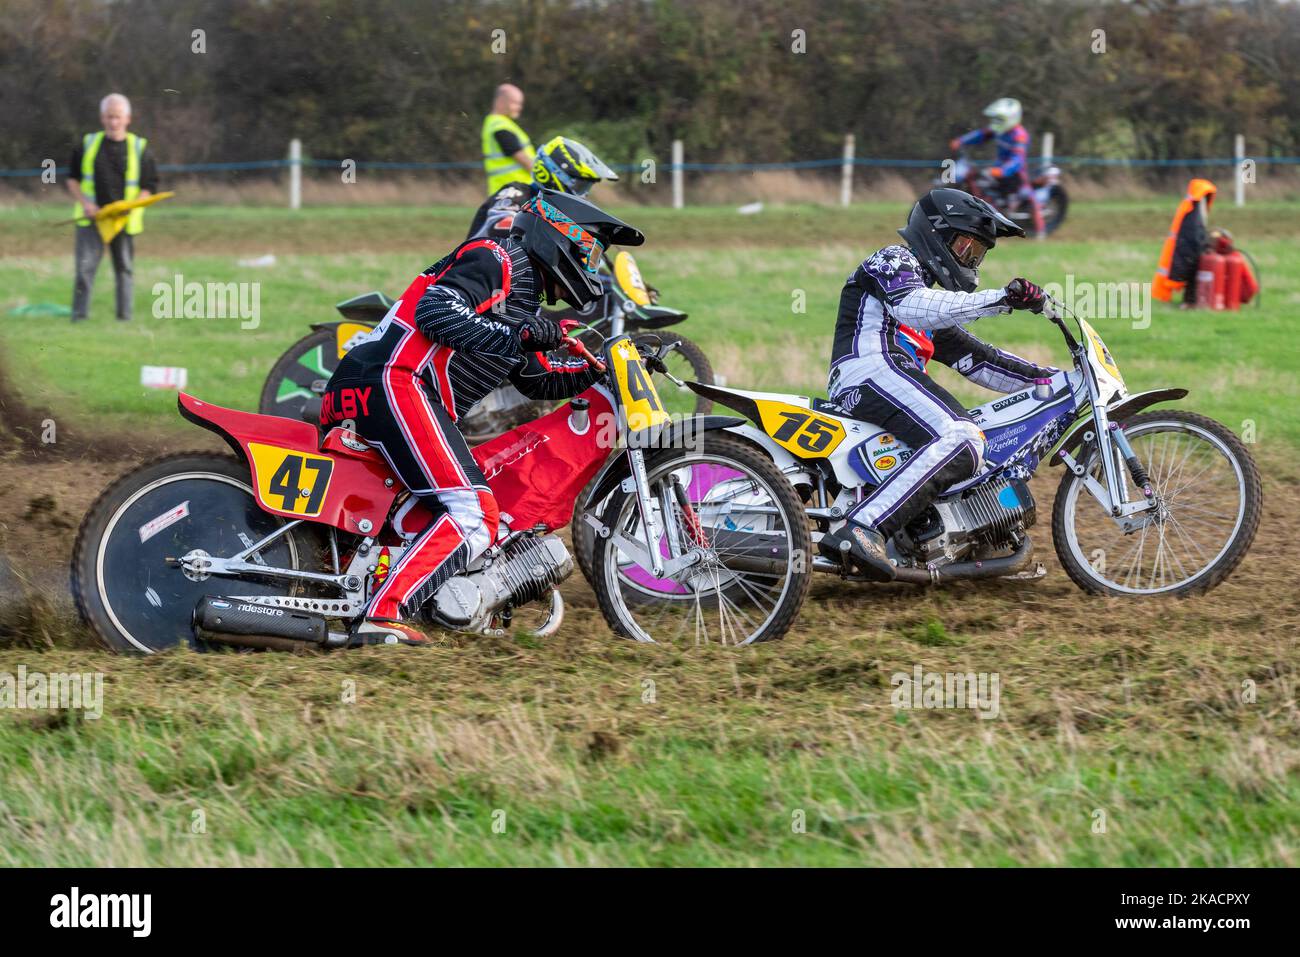 500cc solo class riders racing in grasstrack motorcycle race. Donut Meeting event organised by Southend & District Motorcycle Club. William Thurlby 47 Stock Photo